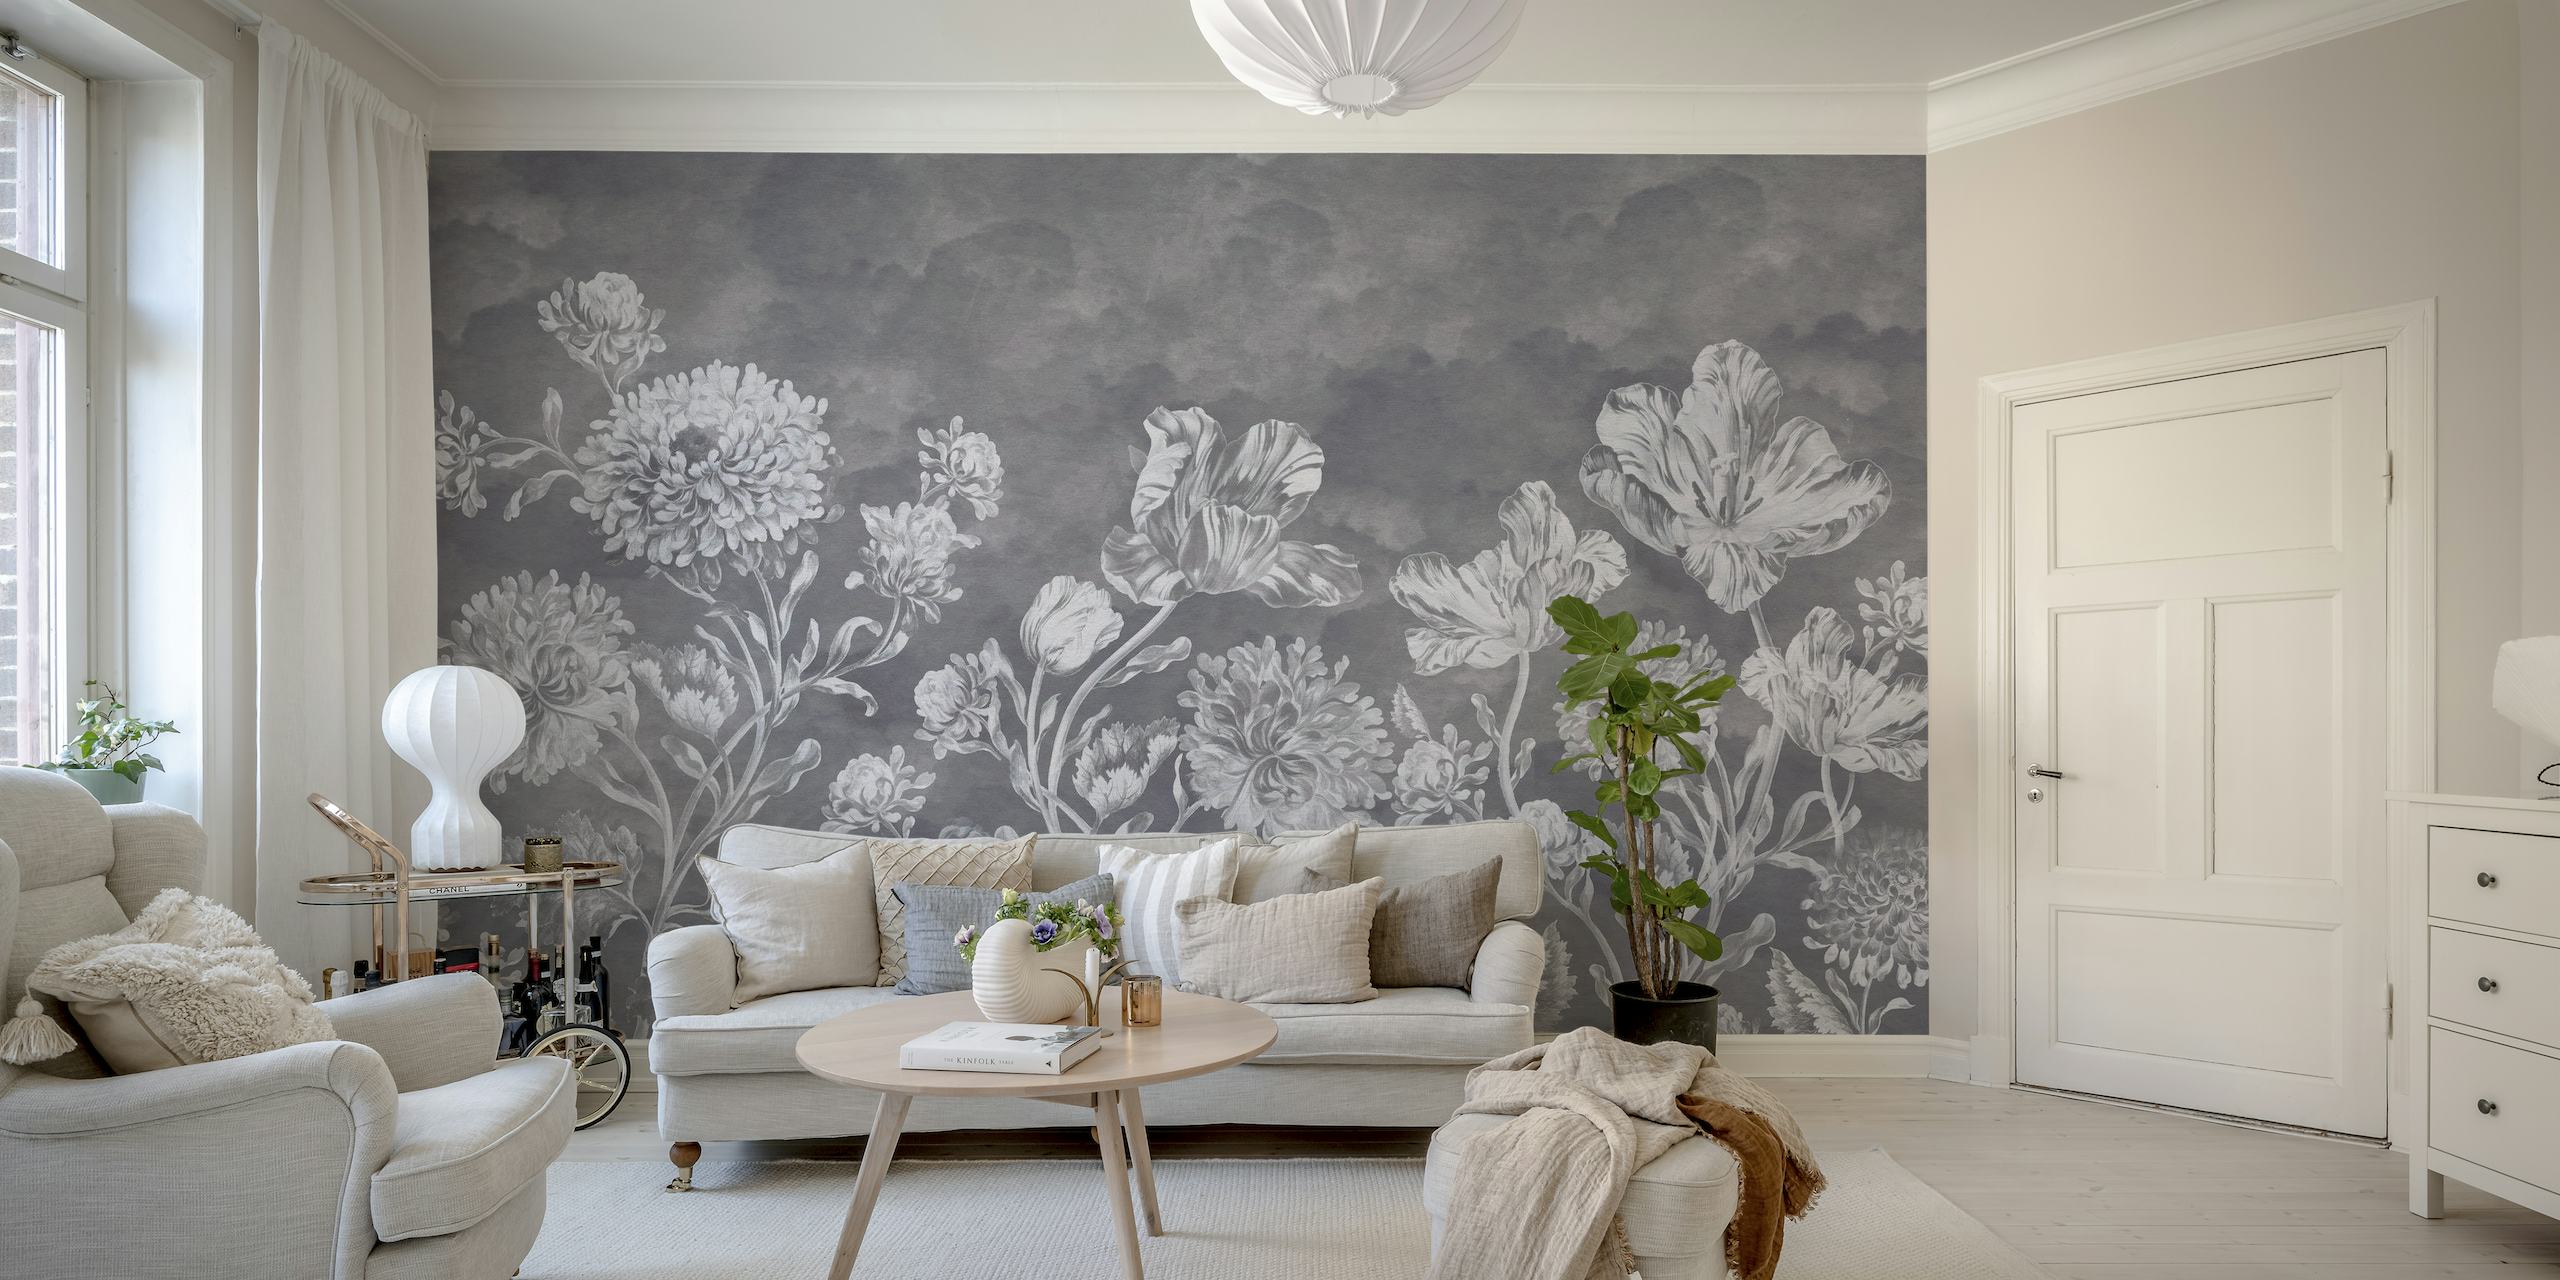 Moody dark baroque style floral wall mural with intricate flower designs in grayscale